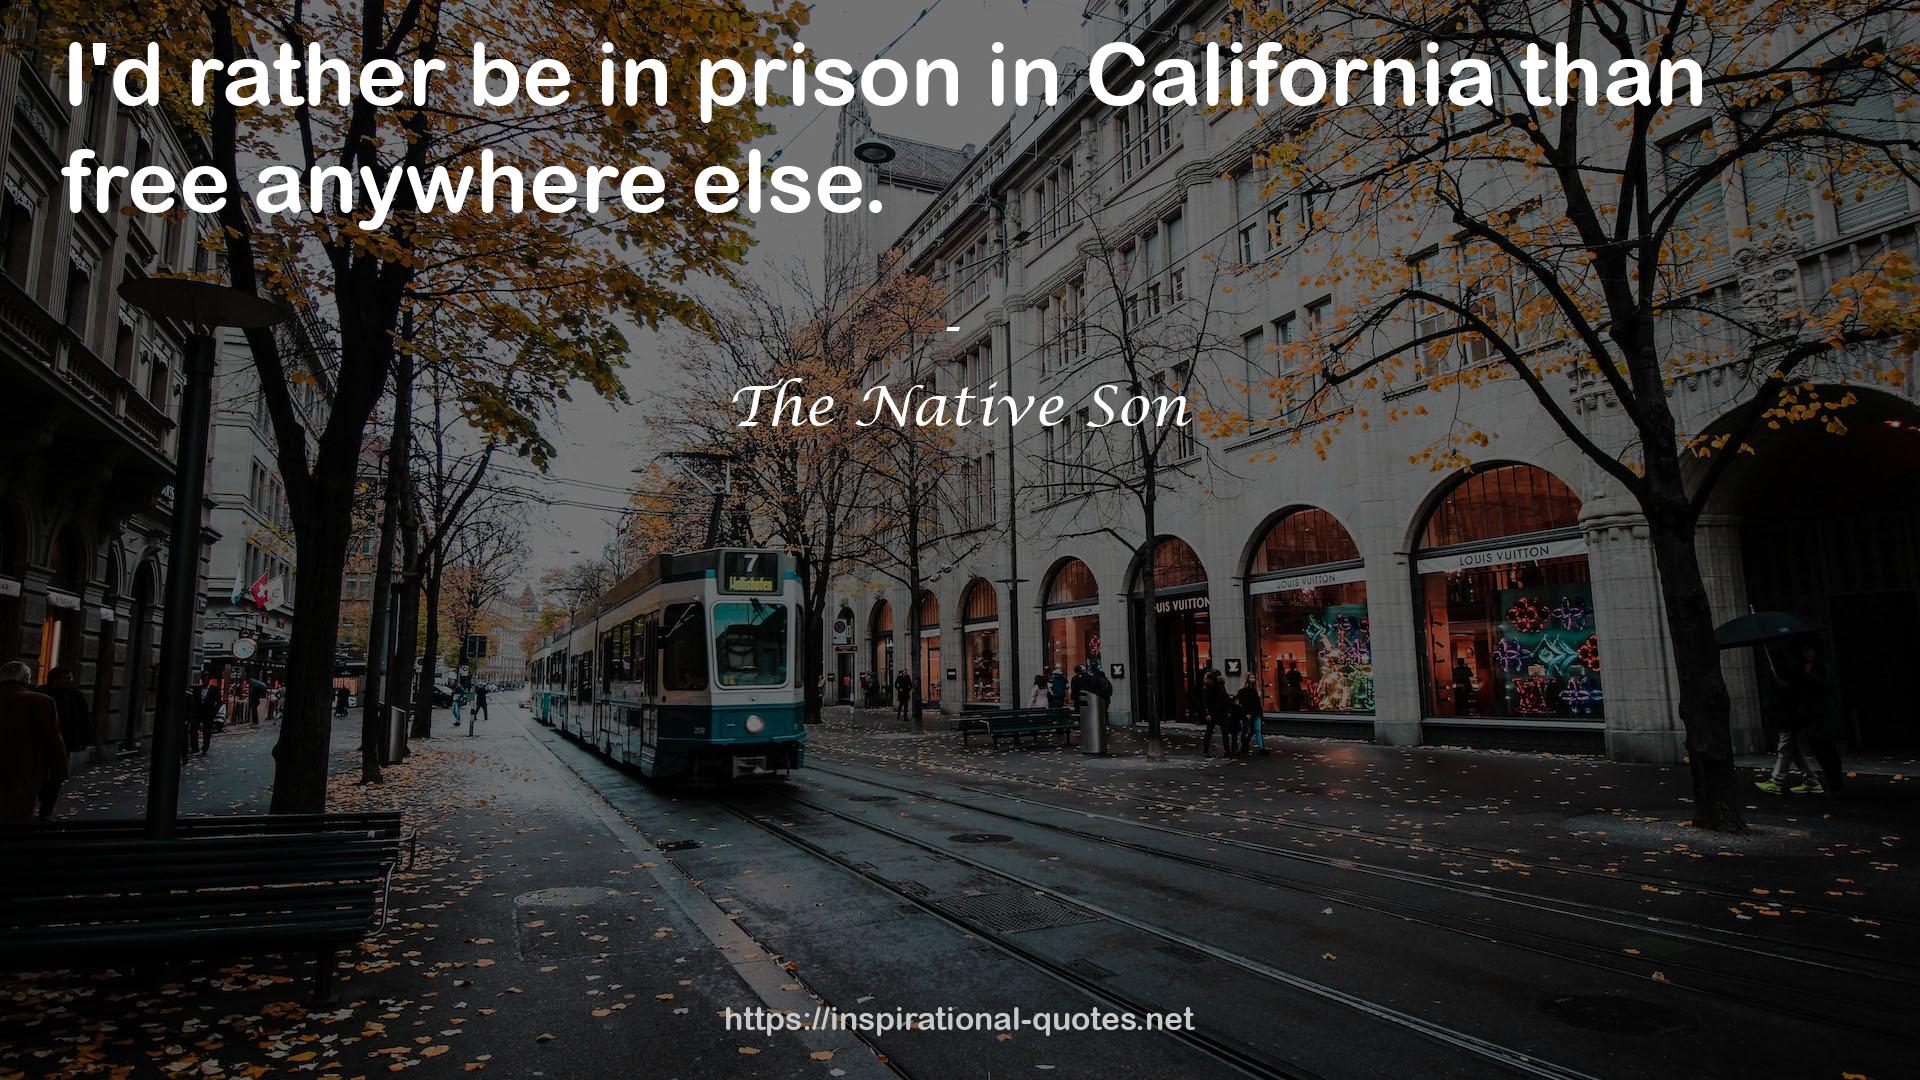 The Native Son QUOTES